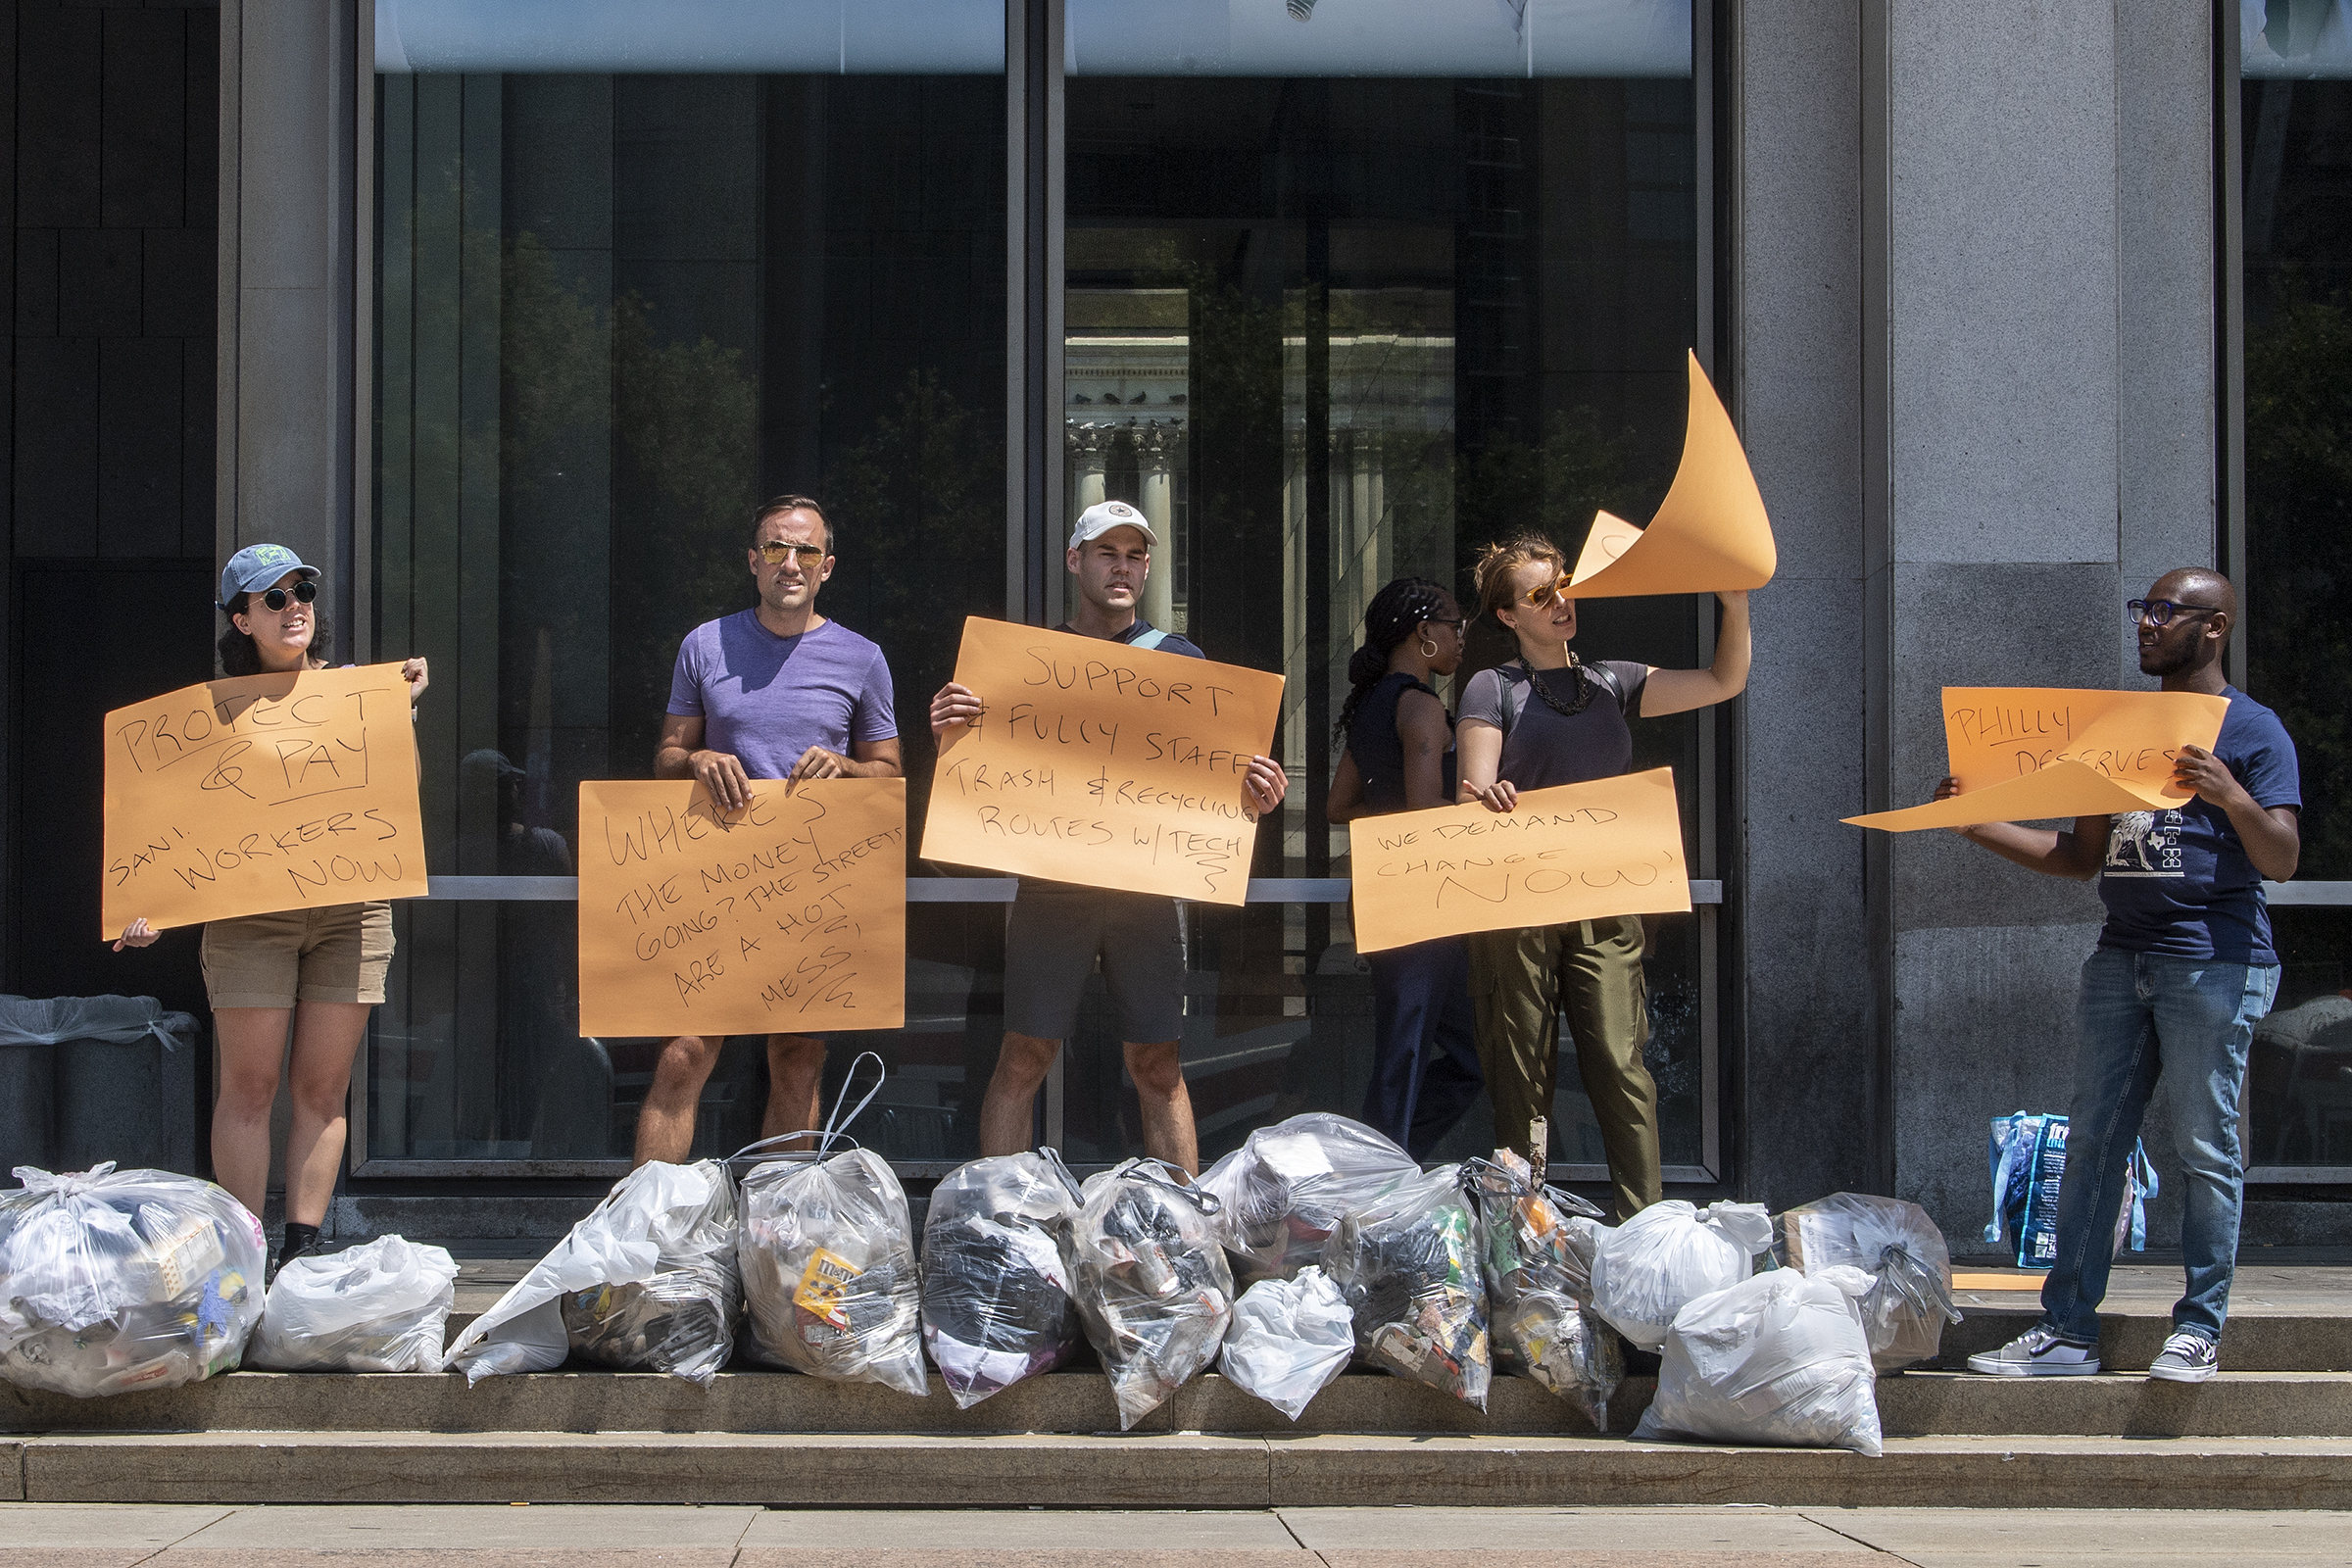 Philly's trash problem was already bad. Now, it's worse — WHYY